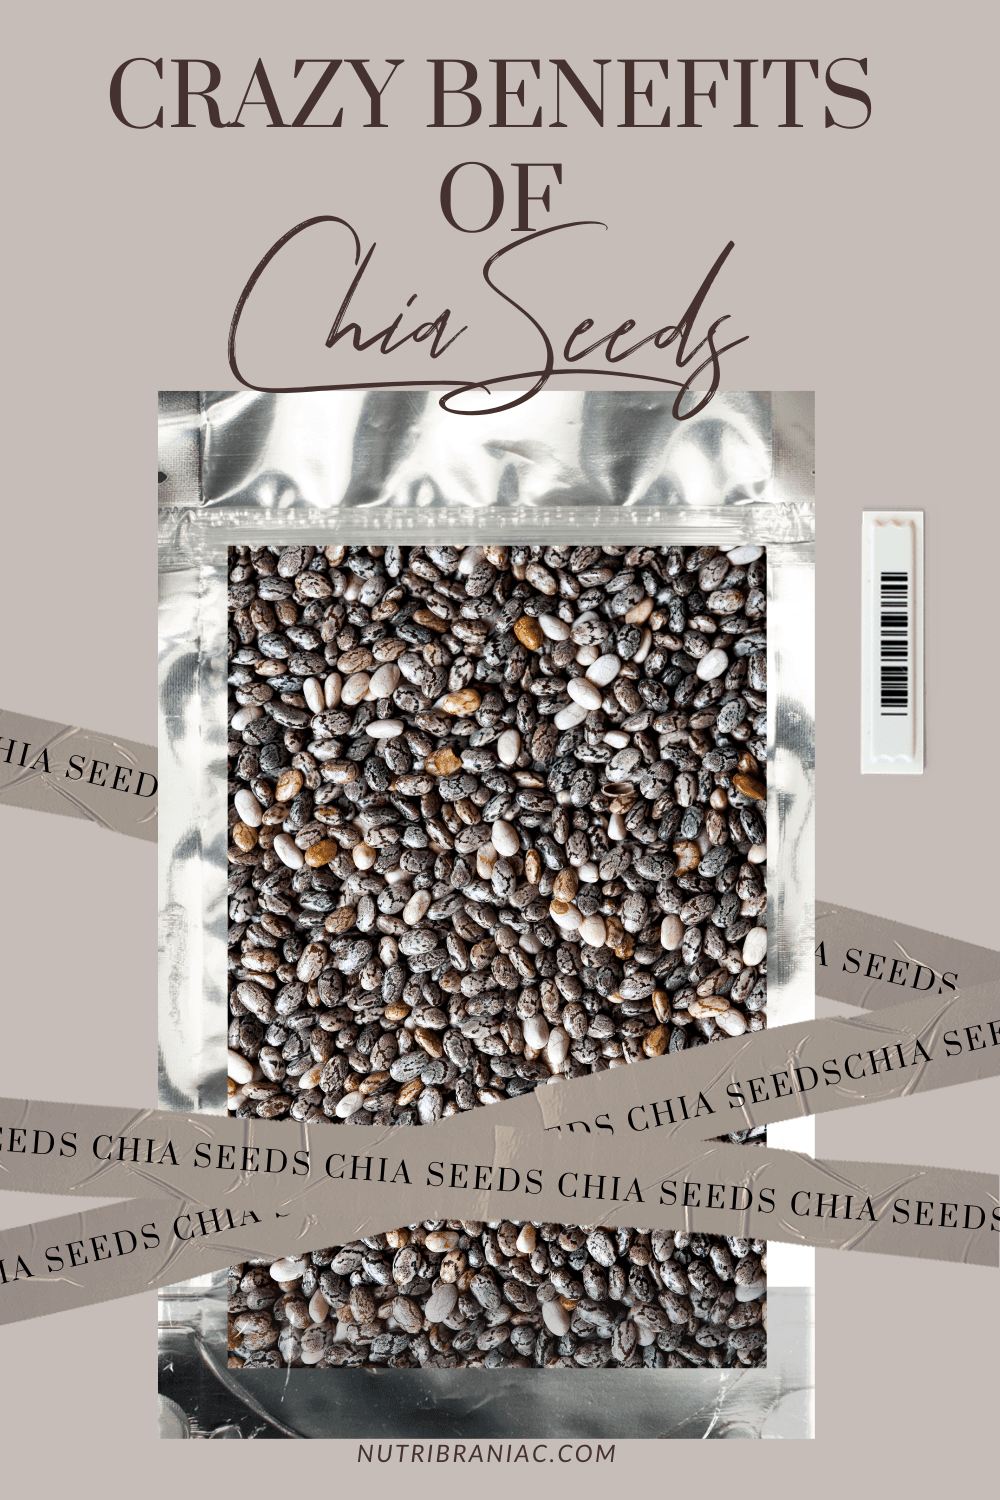 Graphic image of a package of chia seeds with text overlay "Benefits of Chia Seeds"